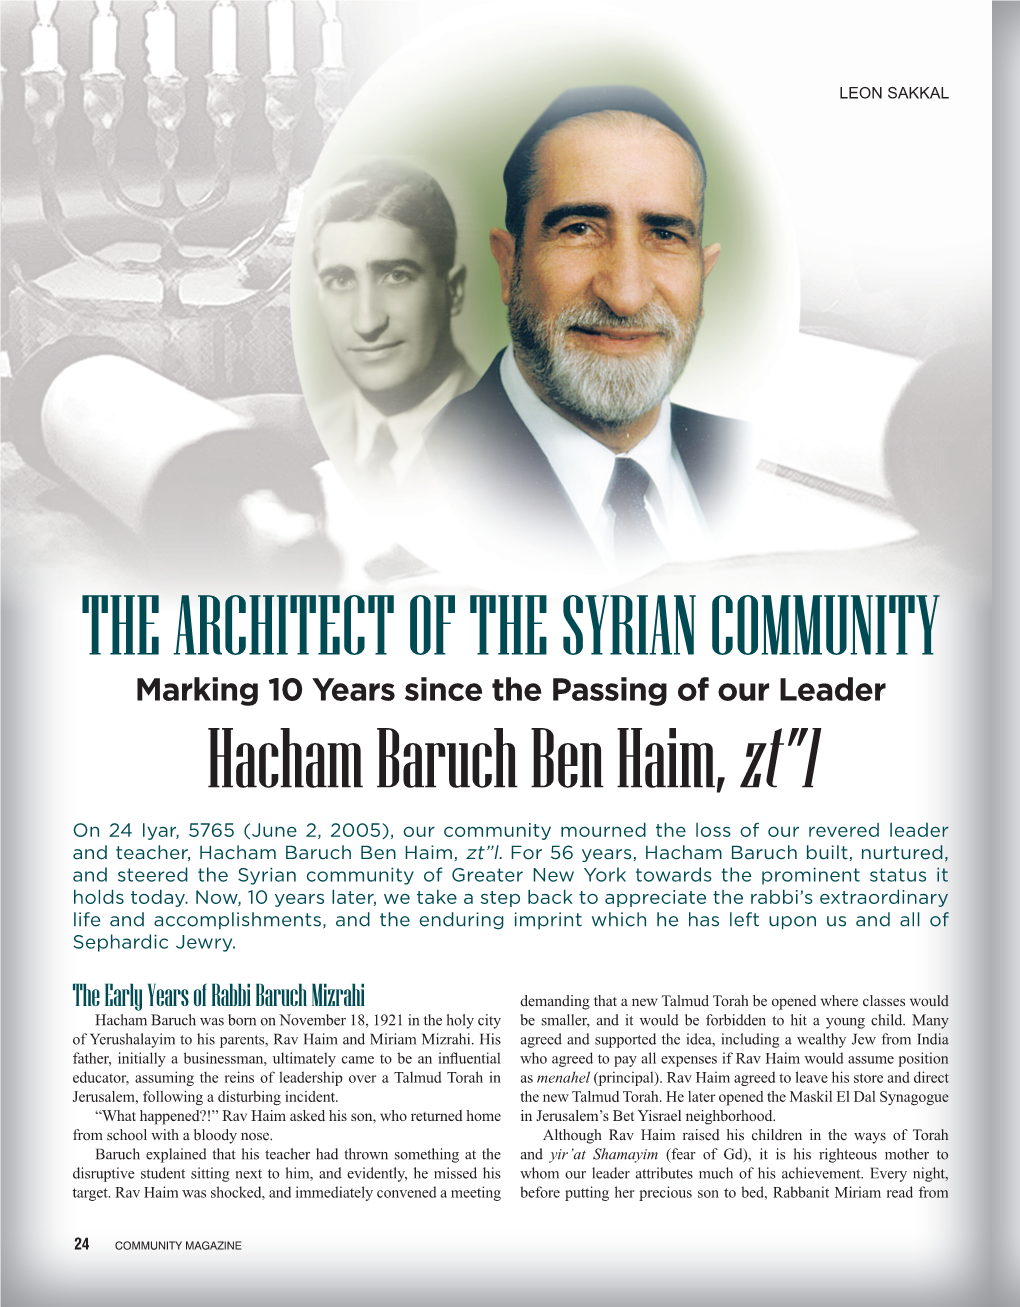 THE ARCHITECT of the SYRIAN COMMUNITY Hacham Baruch